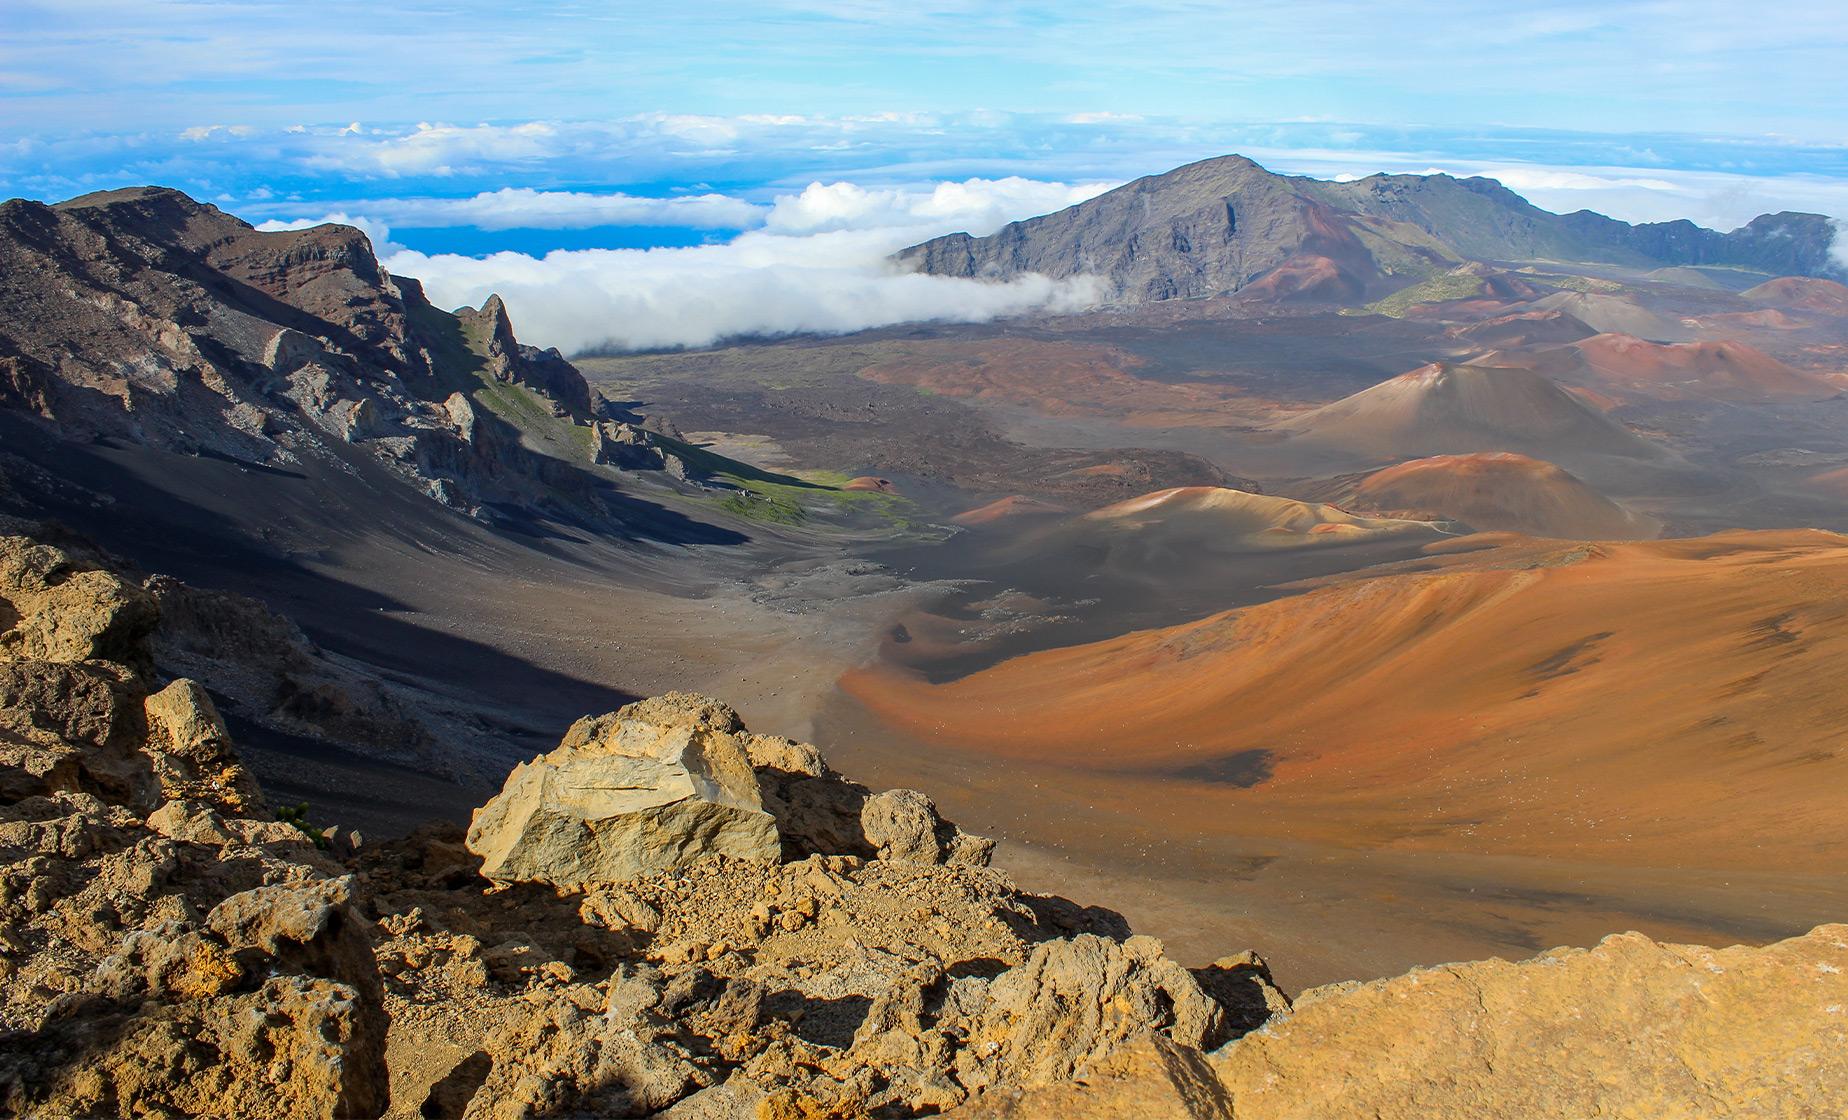 Haleakala Crater, Upcountry and Iao Valley